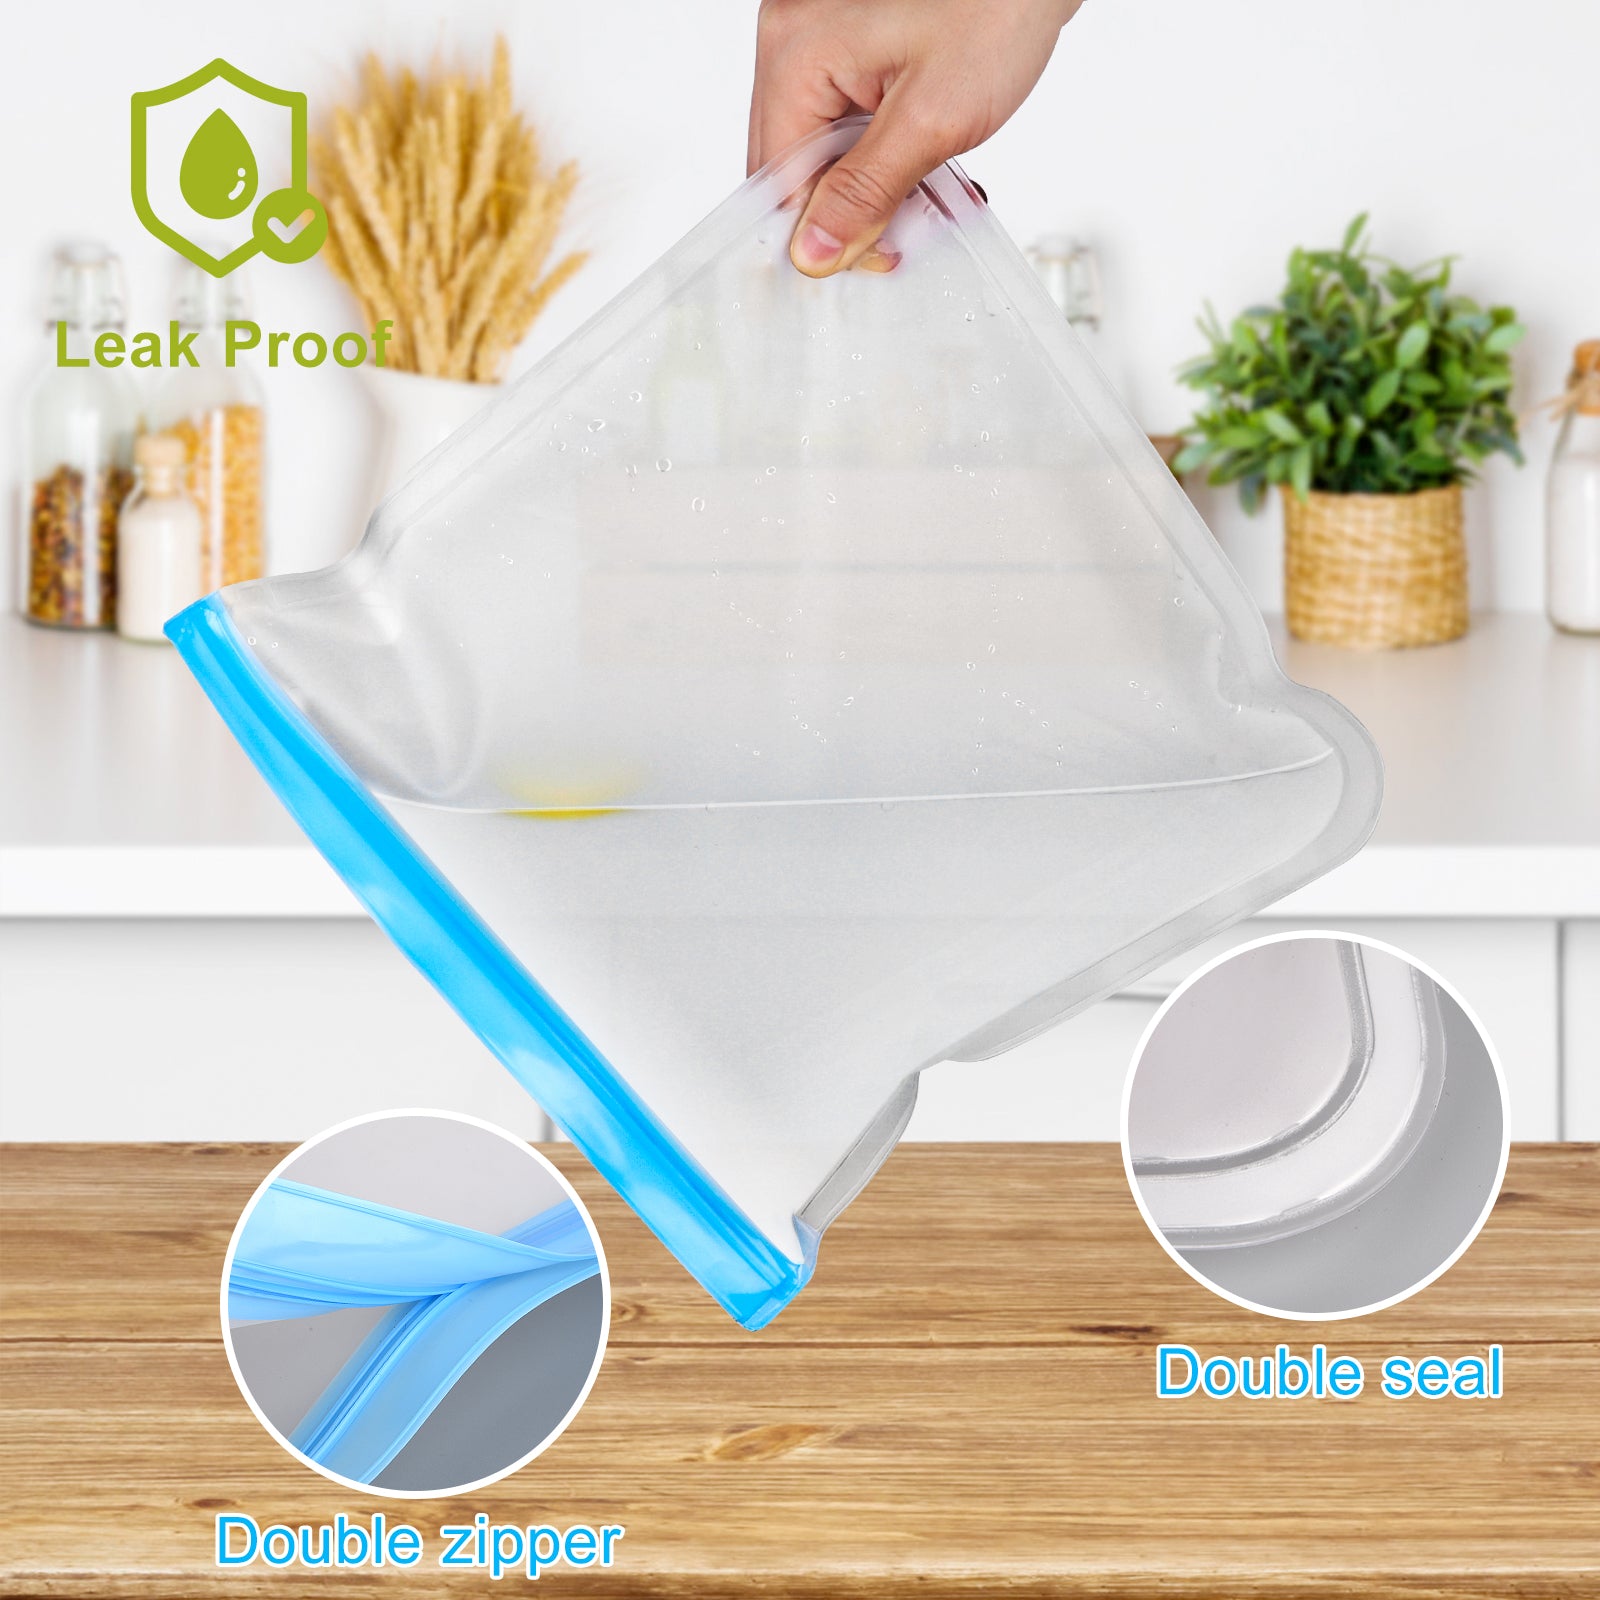 10 Pack Dishwasher Safe Reusable Bags Silicone, Leakproof Reusable